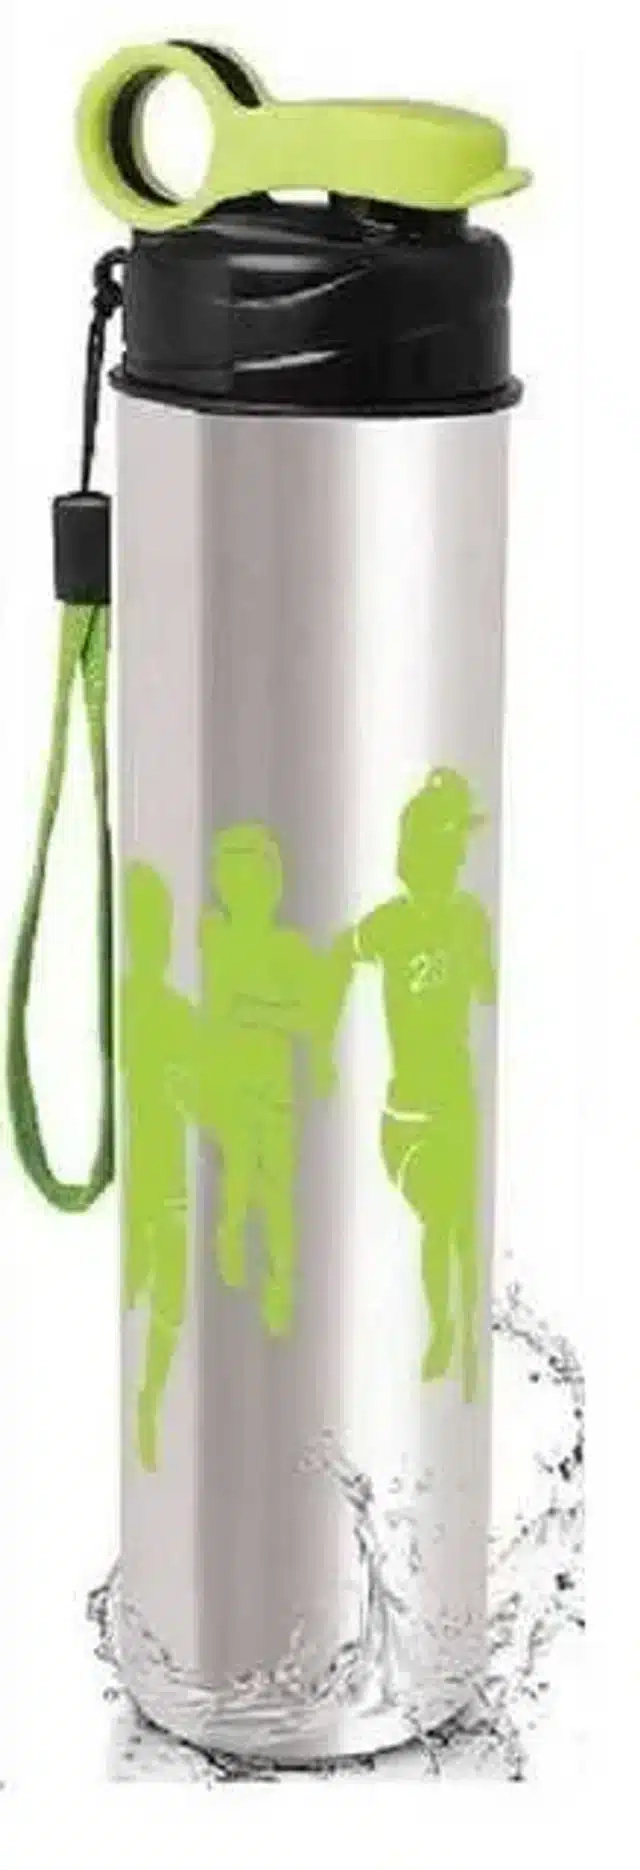 Stainless Steel Non-Insulated Water Bottle (Green, 500 ml)